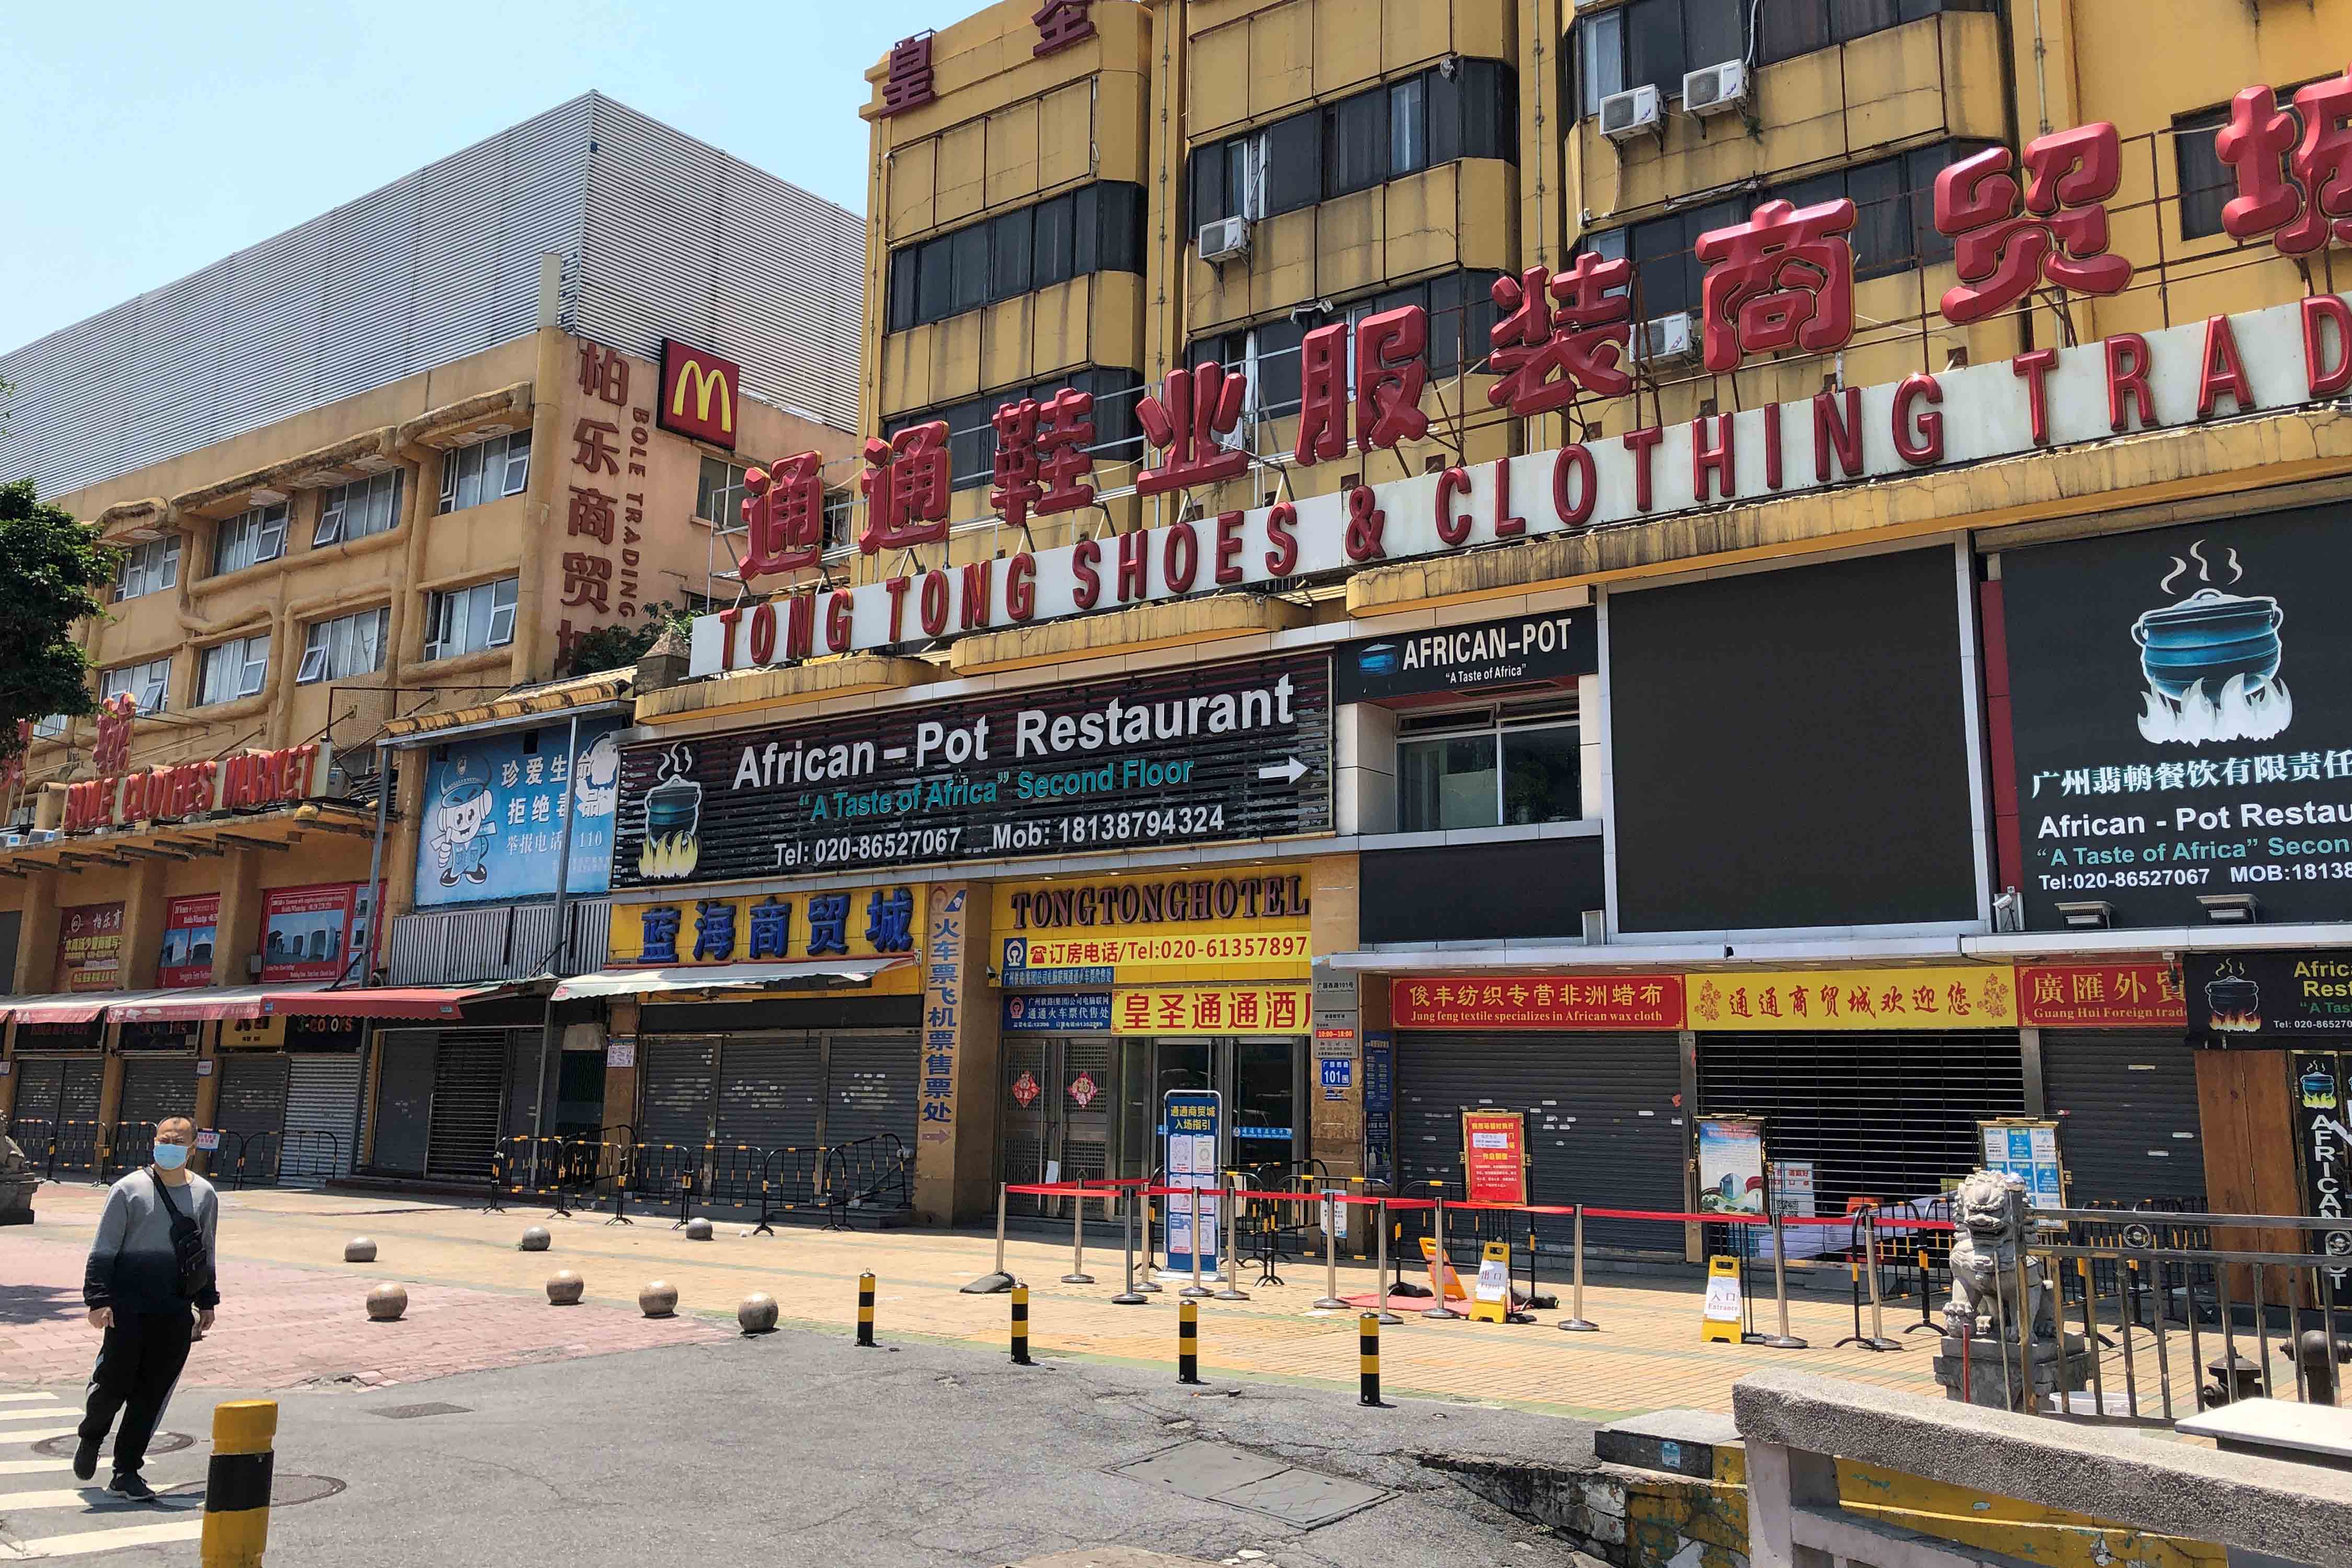 An African restaurant is closed off along with other businesses in Guangzhou's Sanyuanli area, where a neighborhood is in lockdown after several people tested positive for the novel coronavirus disease, in Guangzhou, Guangdong province, China, April 13, 2